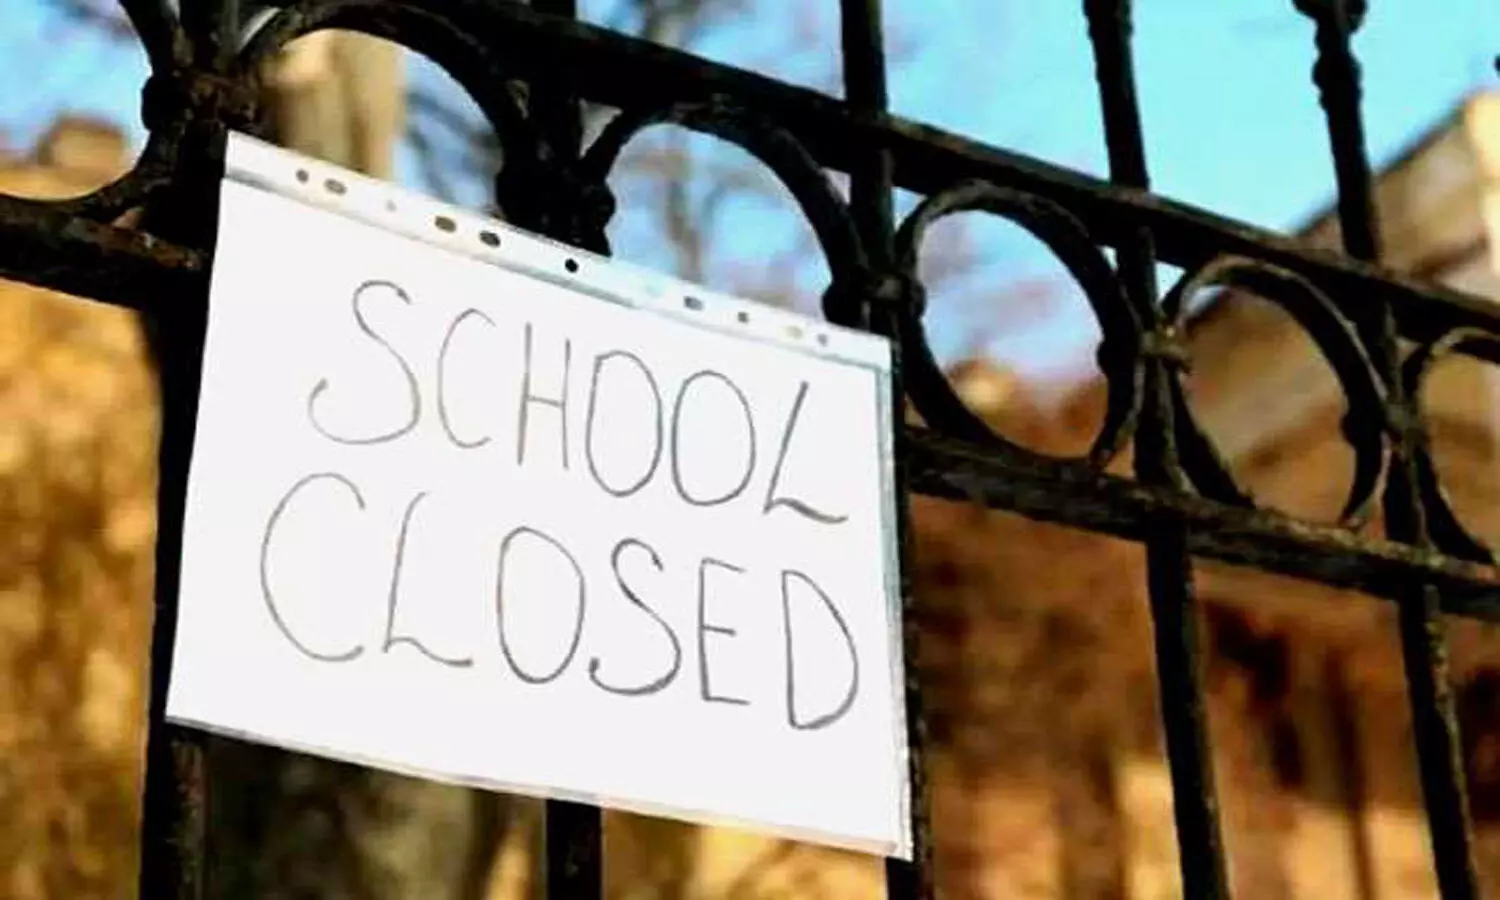 Schools Closed in 35 Districts of UP for Two Days: Whats the Reason?